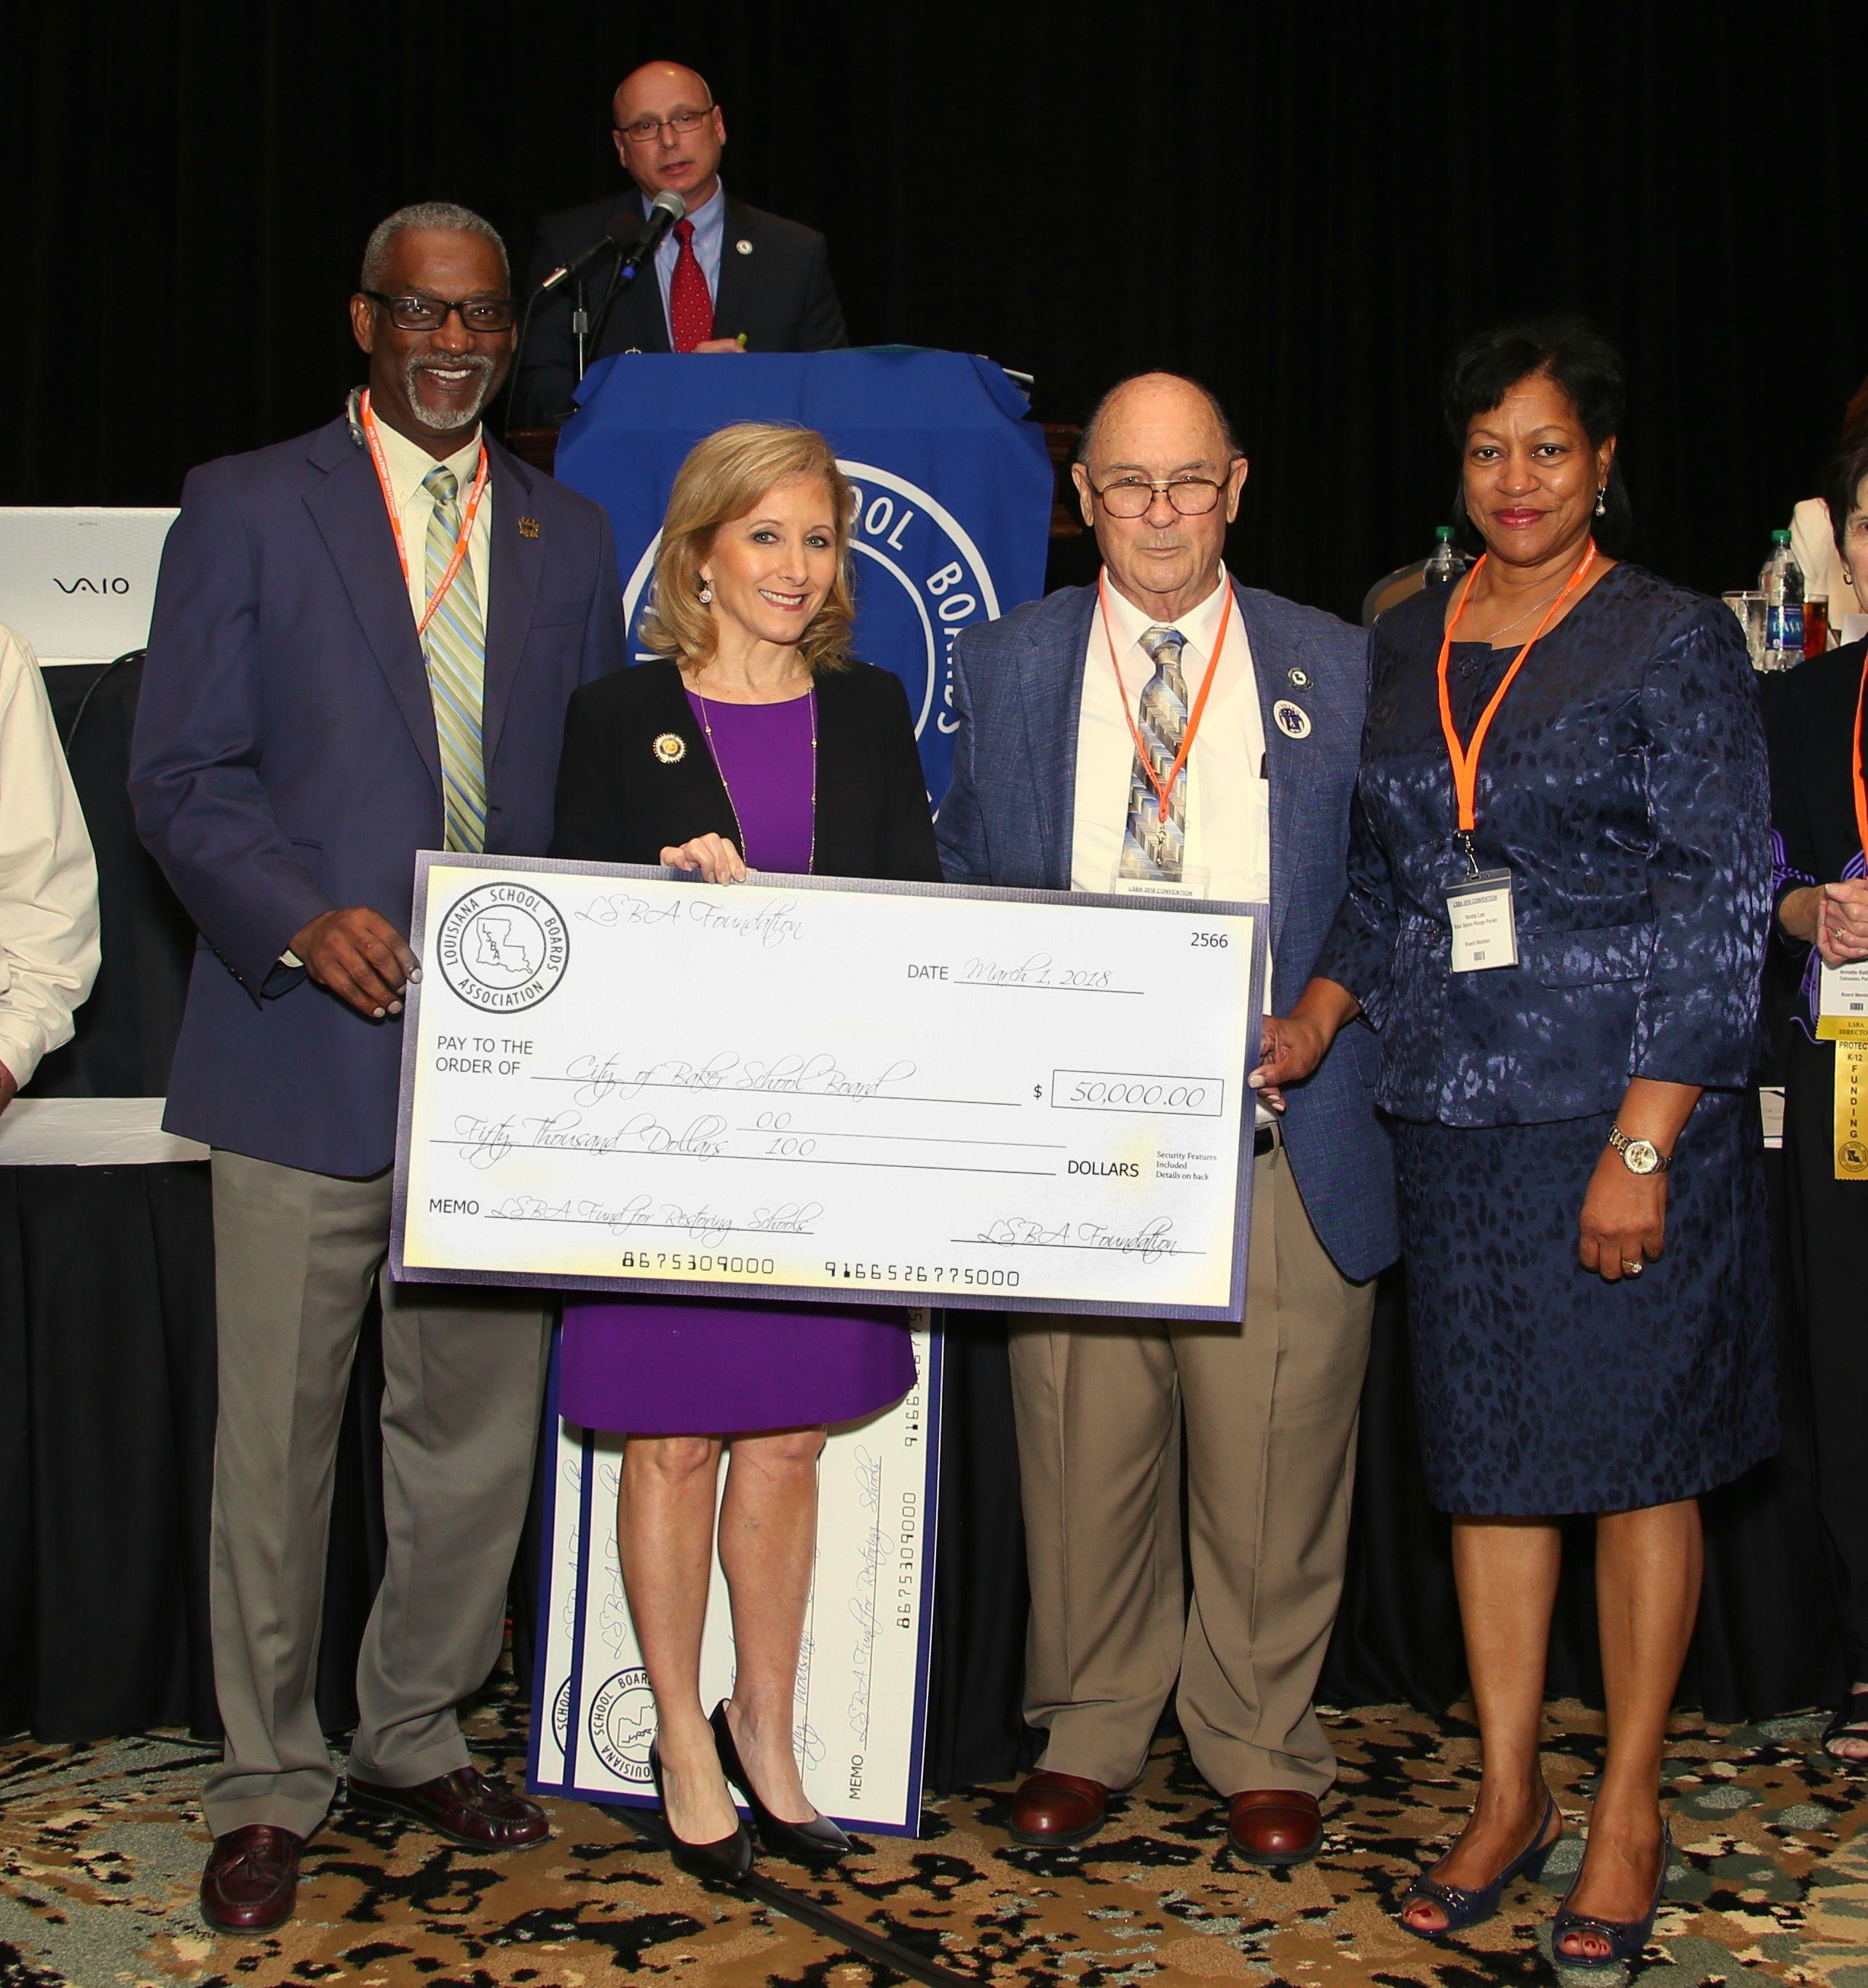 Photo of Superintendent Brister receiving a check for $50,000 at the Louisiana School Board Association's last conference held spring of 2018